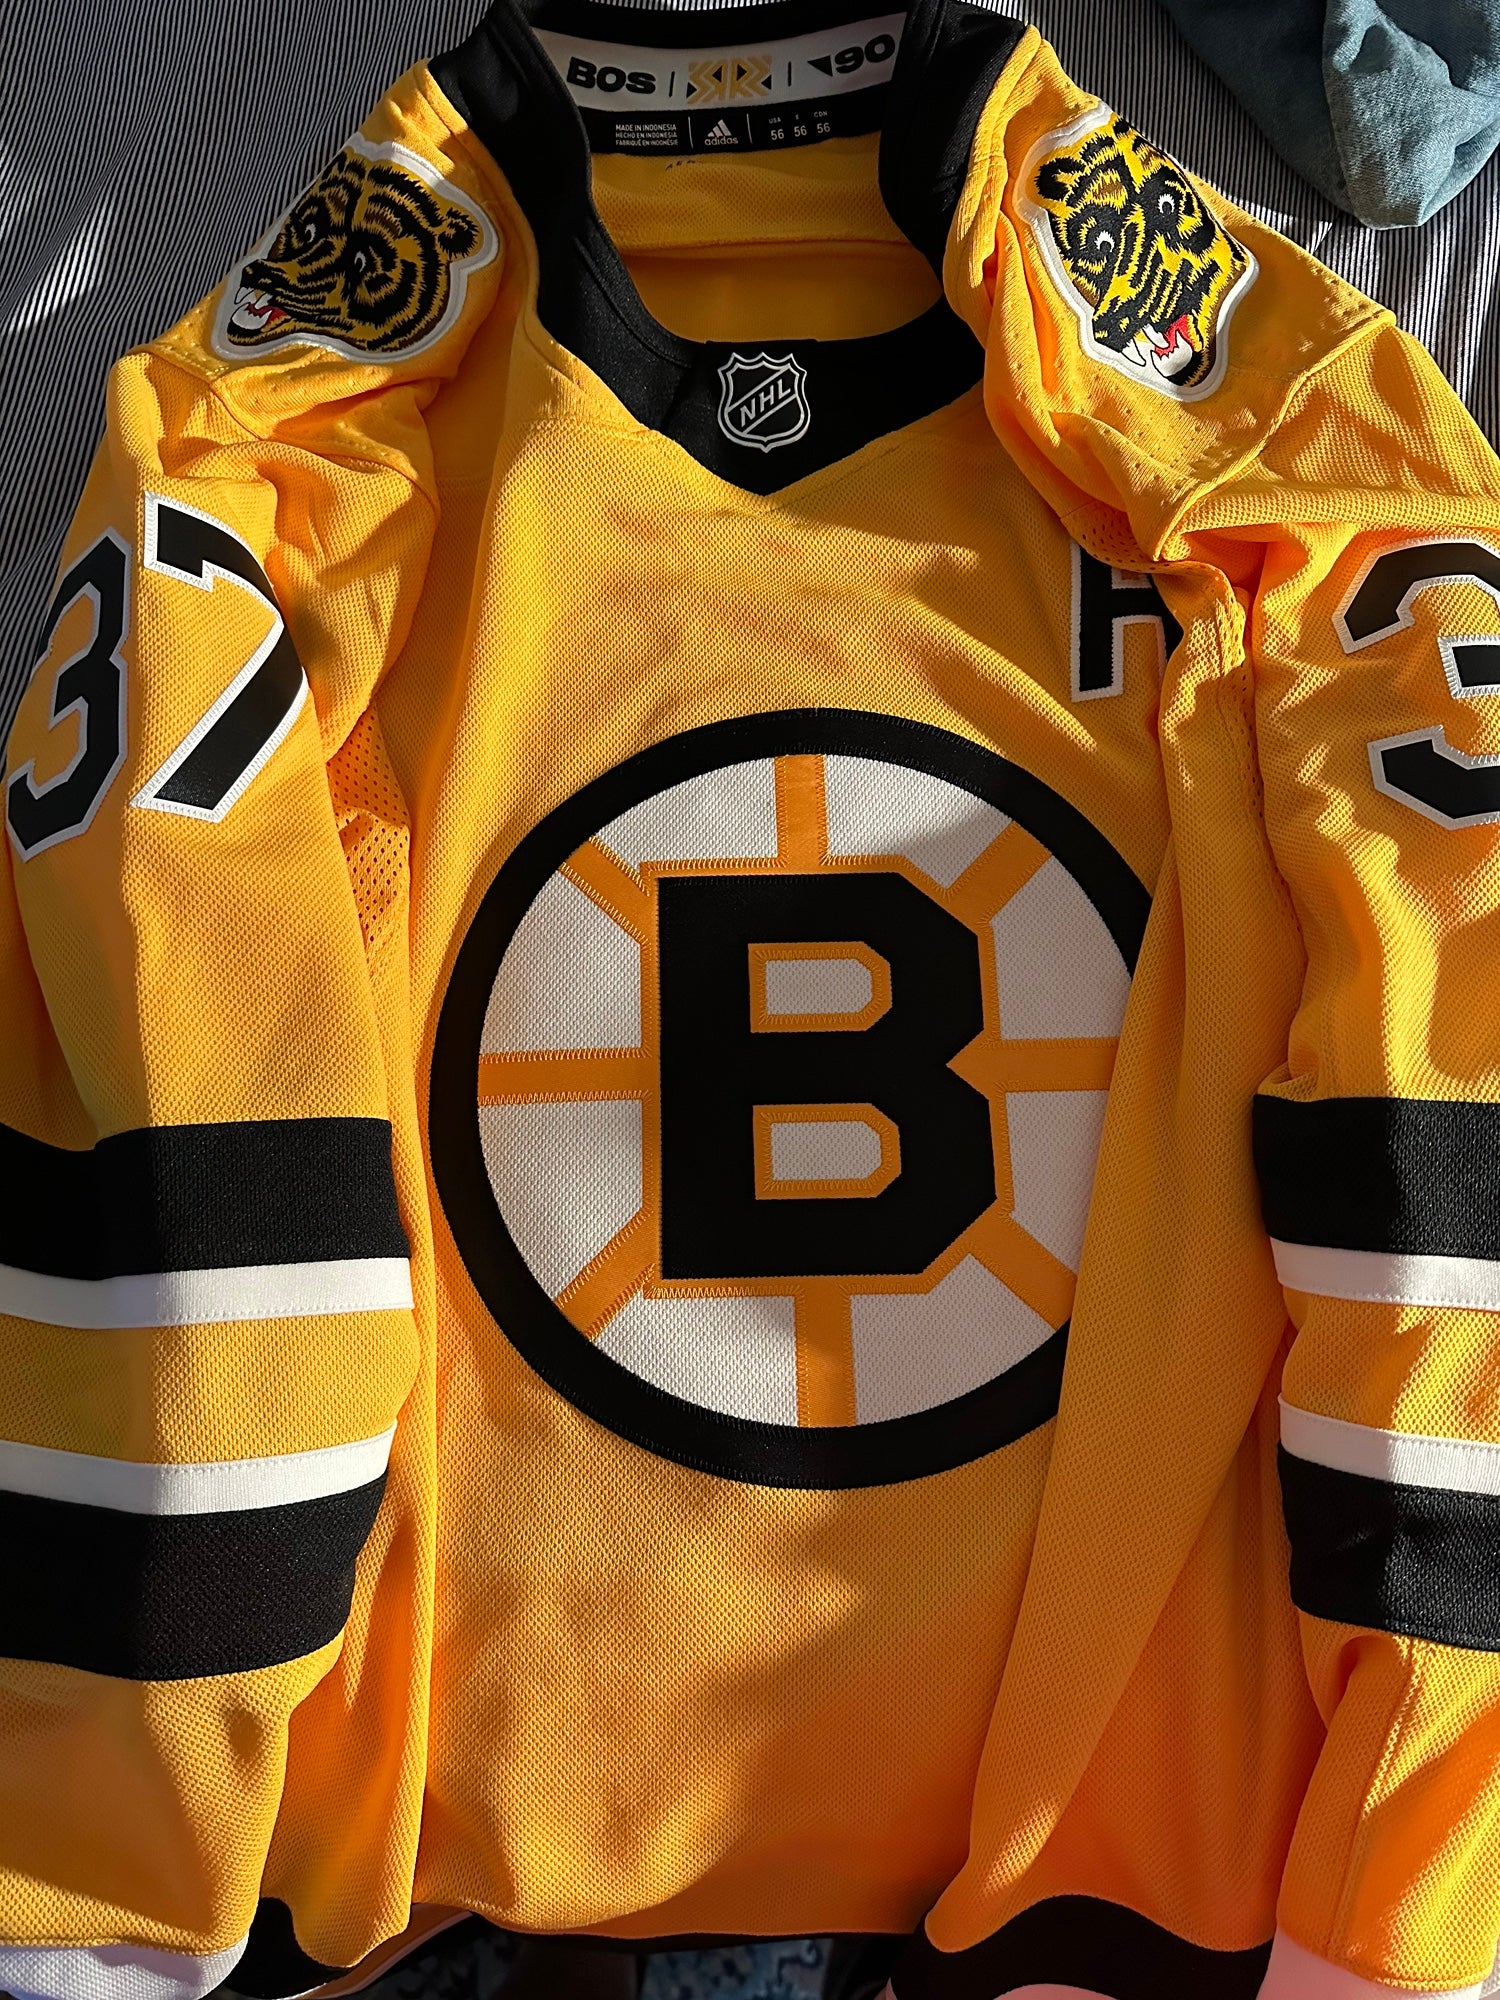 Patrice Bergeron #37 with C patch Bruins 2021 Reverse Retro Special Edition  yellow Jersey on sale,for Cheap,wholesale from China